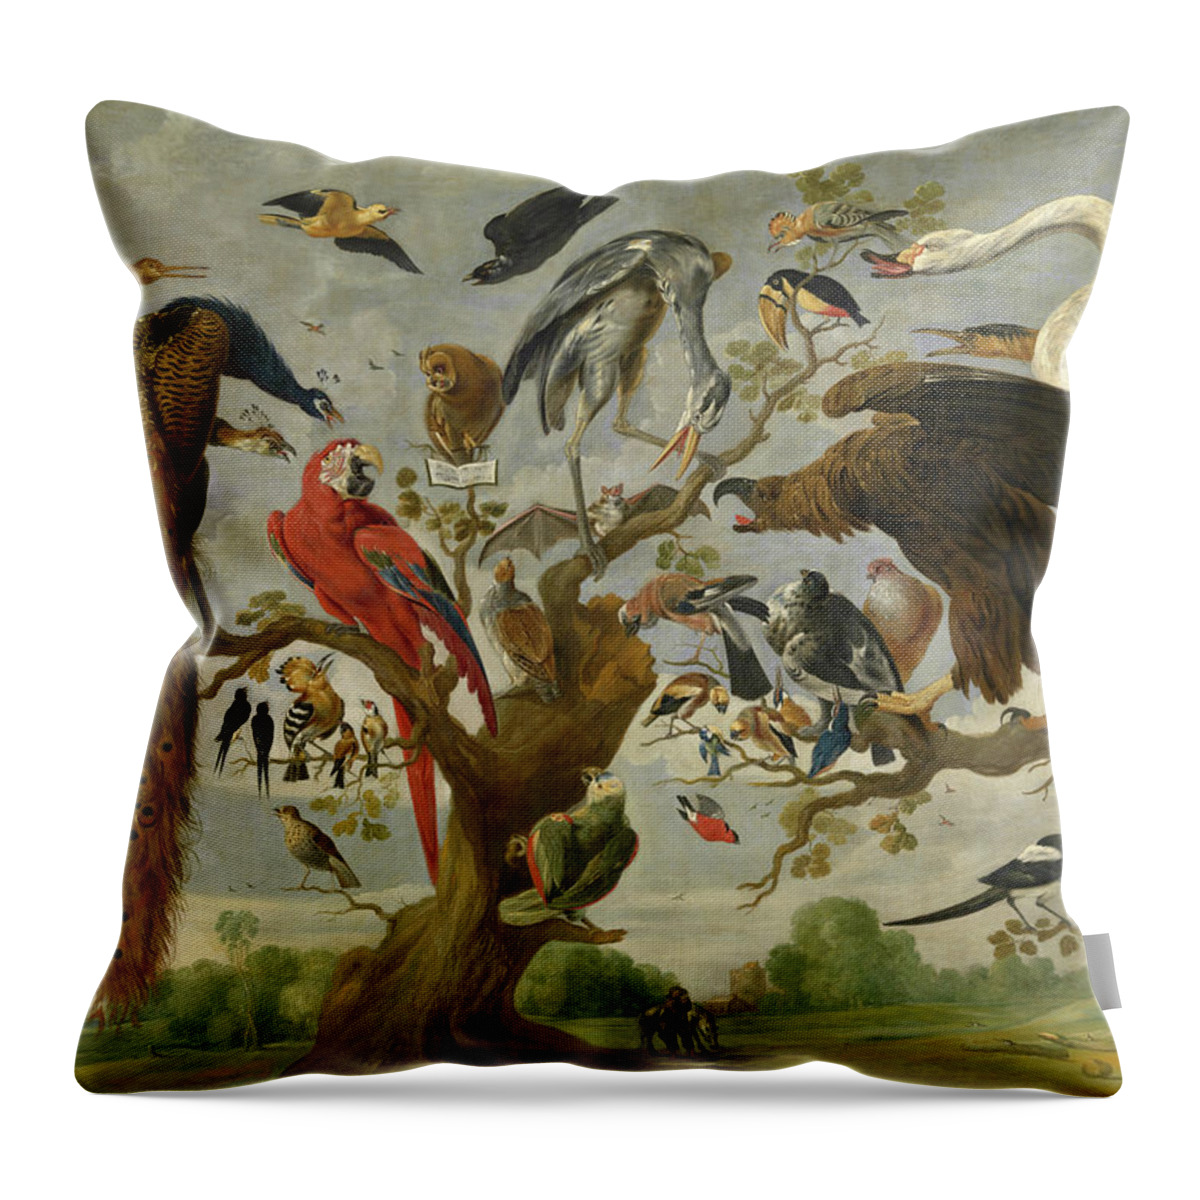 Owl Throw Pillow featuring the painting The Mockery Of The Owl by Jan van Kessel